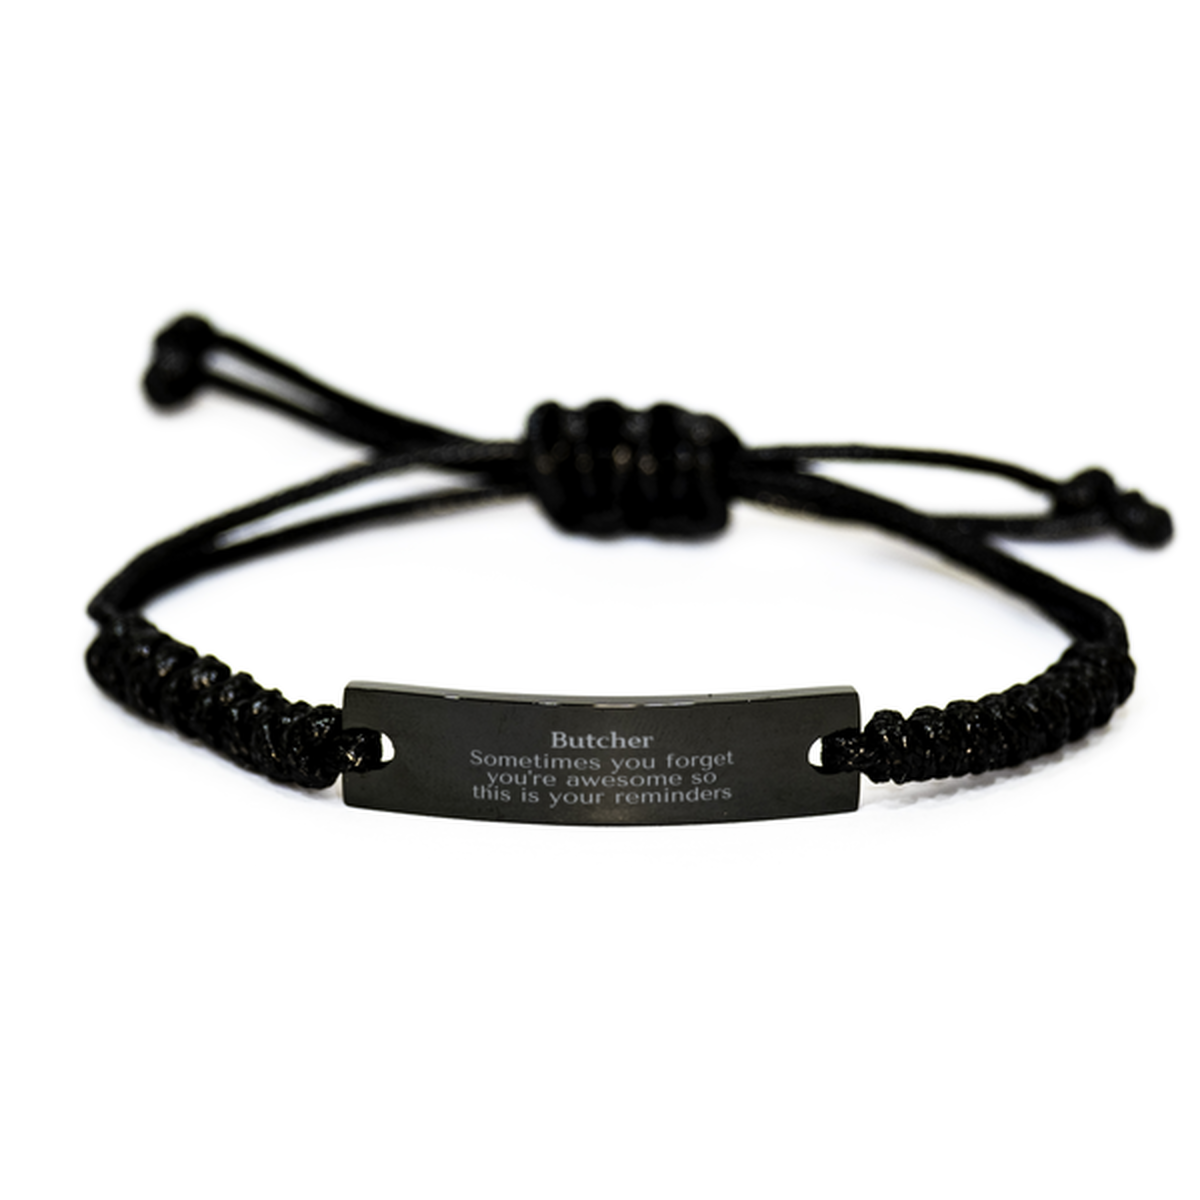 Sentimental Butcher Black Rope Bracelet, Butcher Sometimes you forget you're awesome so this is your reminders, Graduation Christmas Birthday Gifts for Butcher, Men, Women, Coworkers